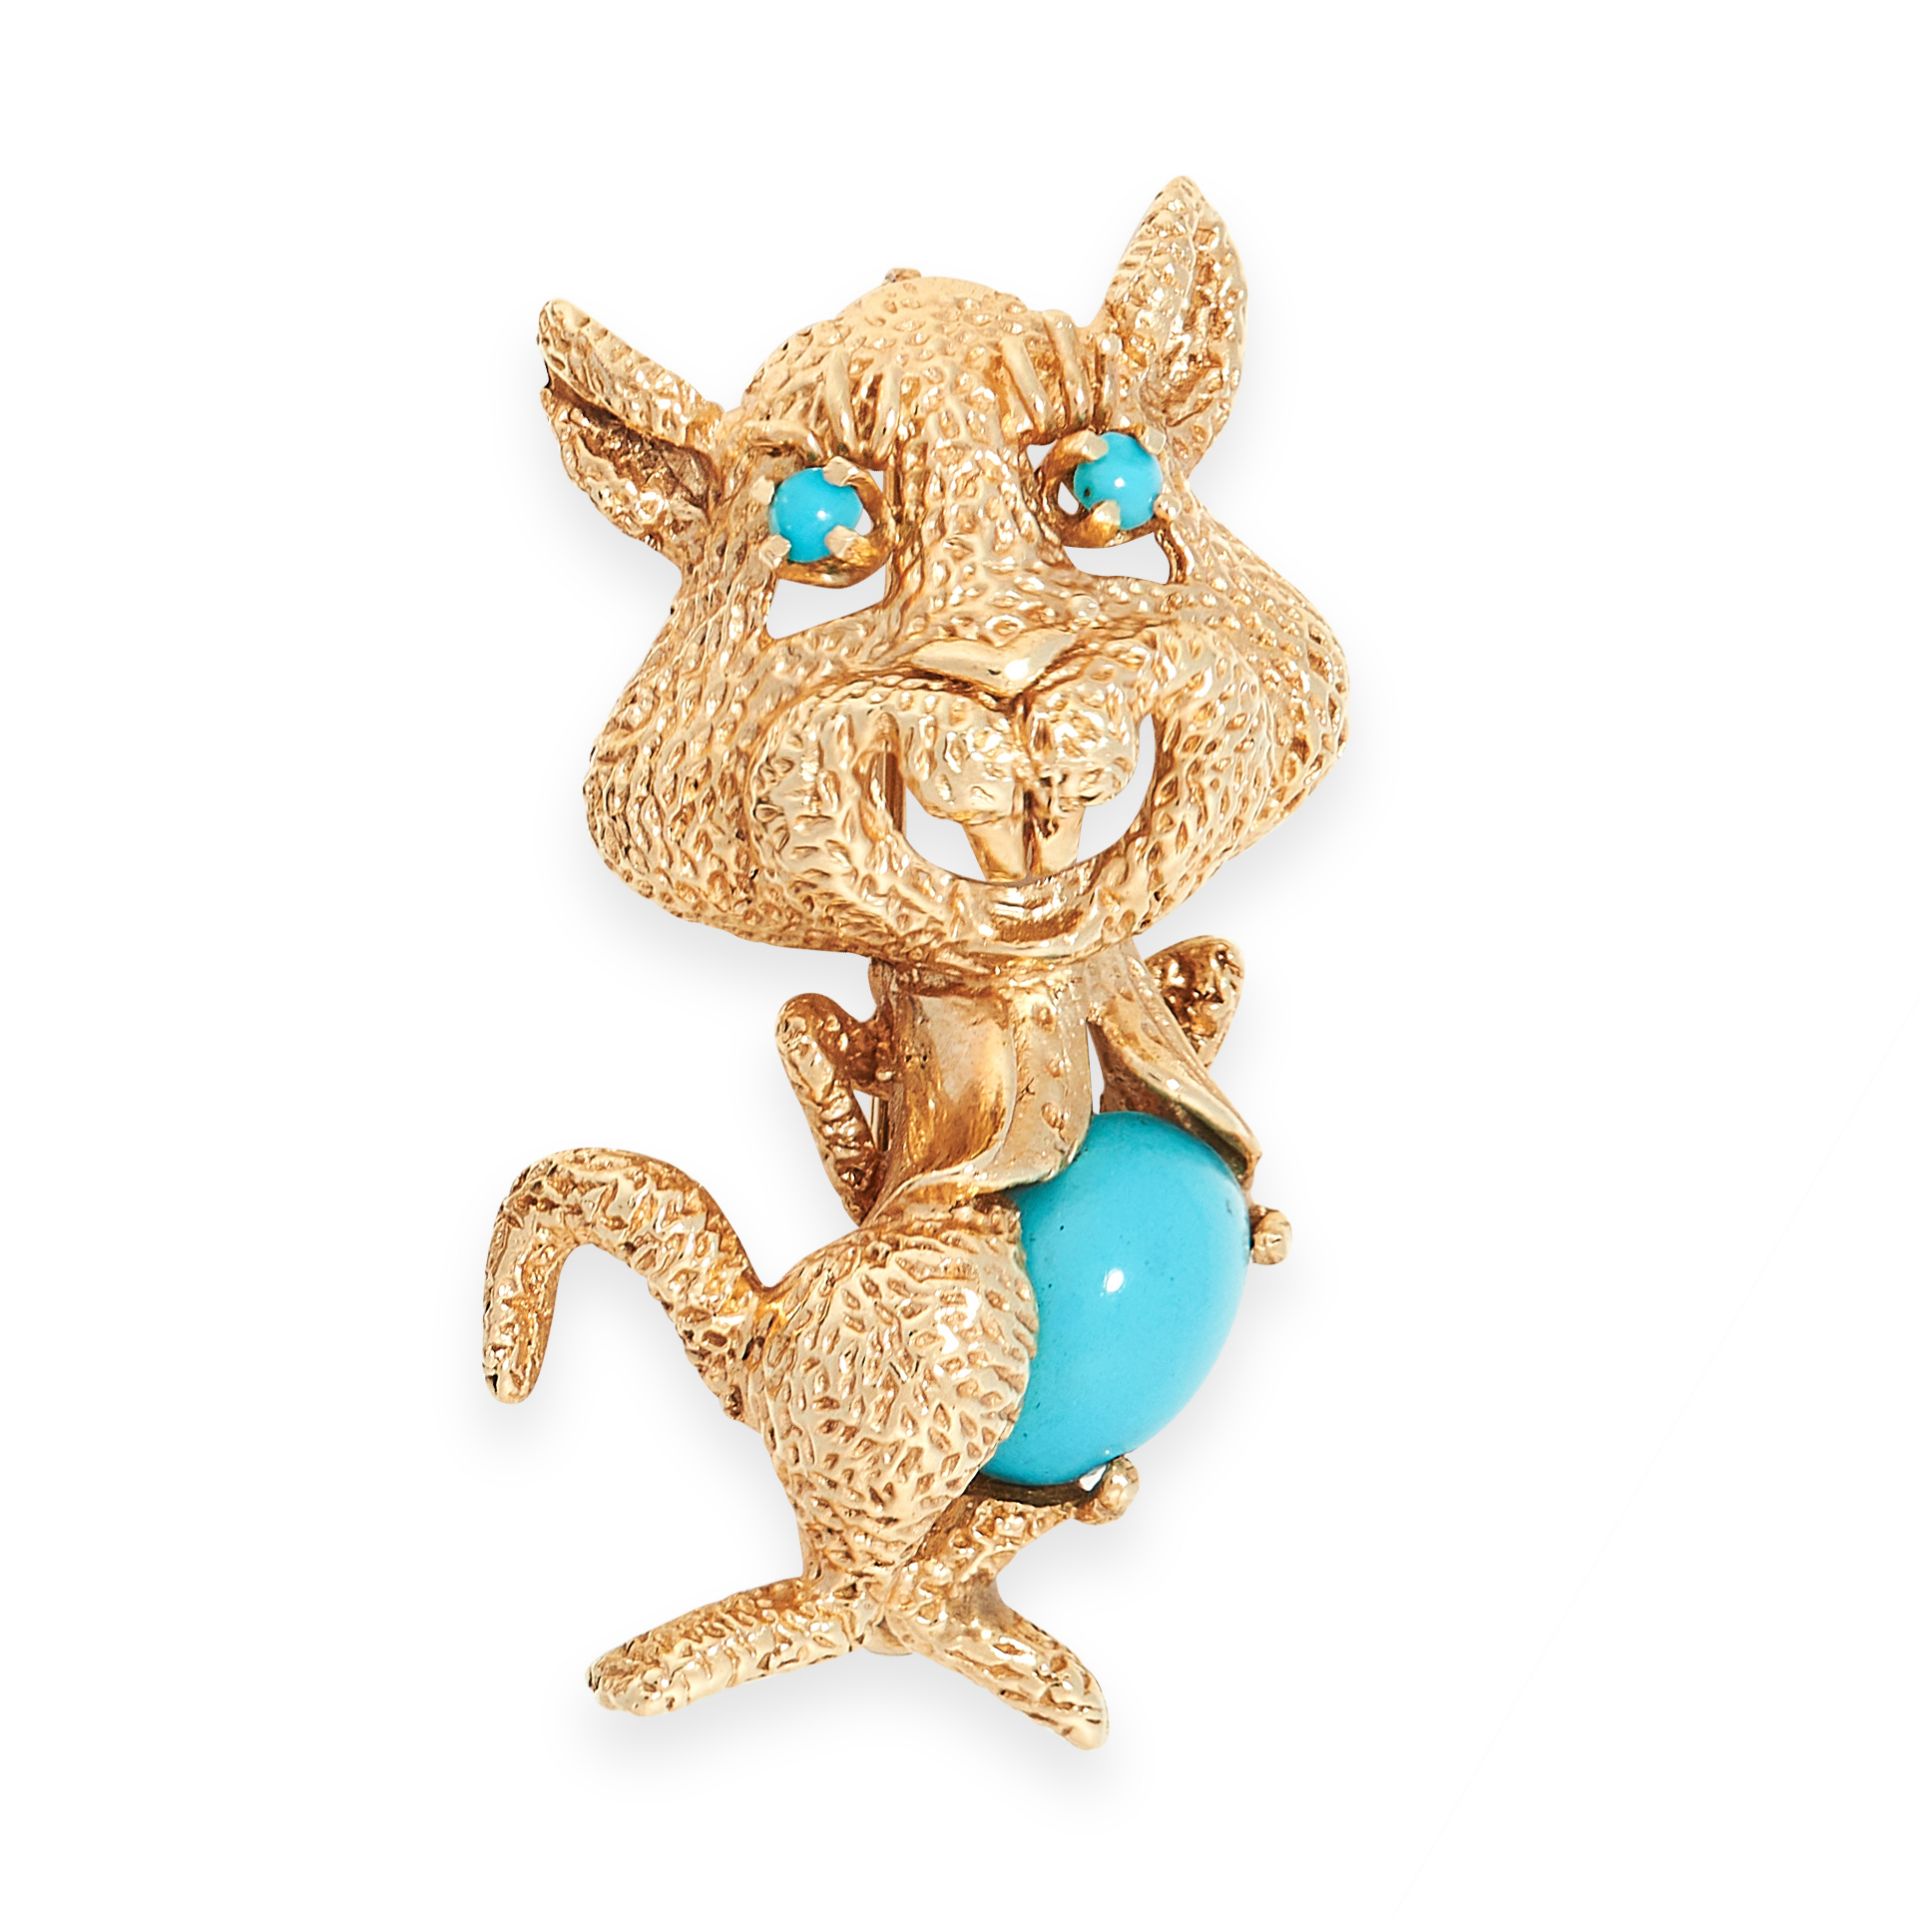 VINTAGE NOVELTY TURQUOISE CHIPMUNK BROOCH in yellow gold, designed as a chipmunk in a waistcoat,